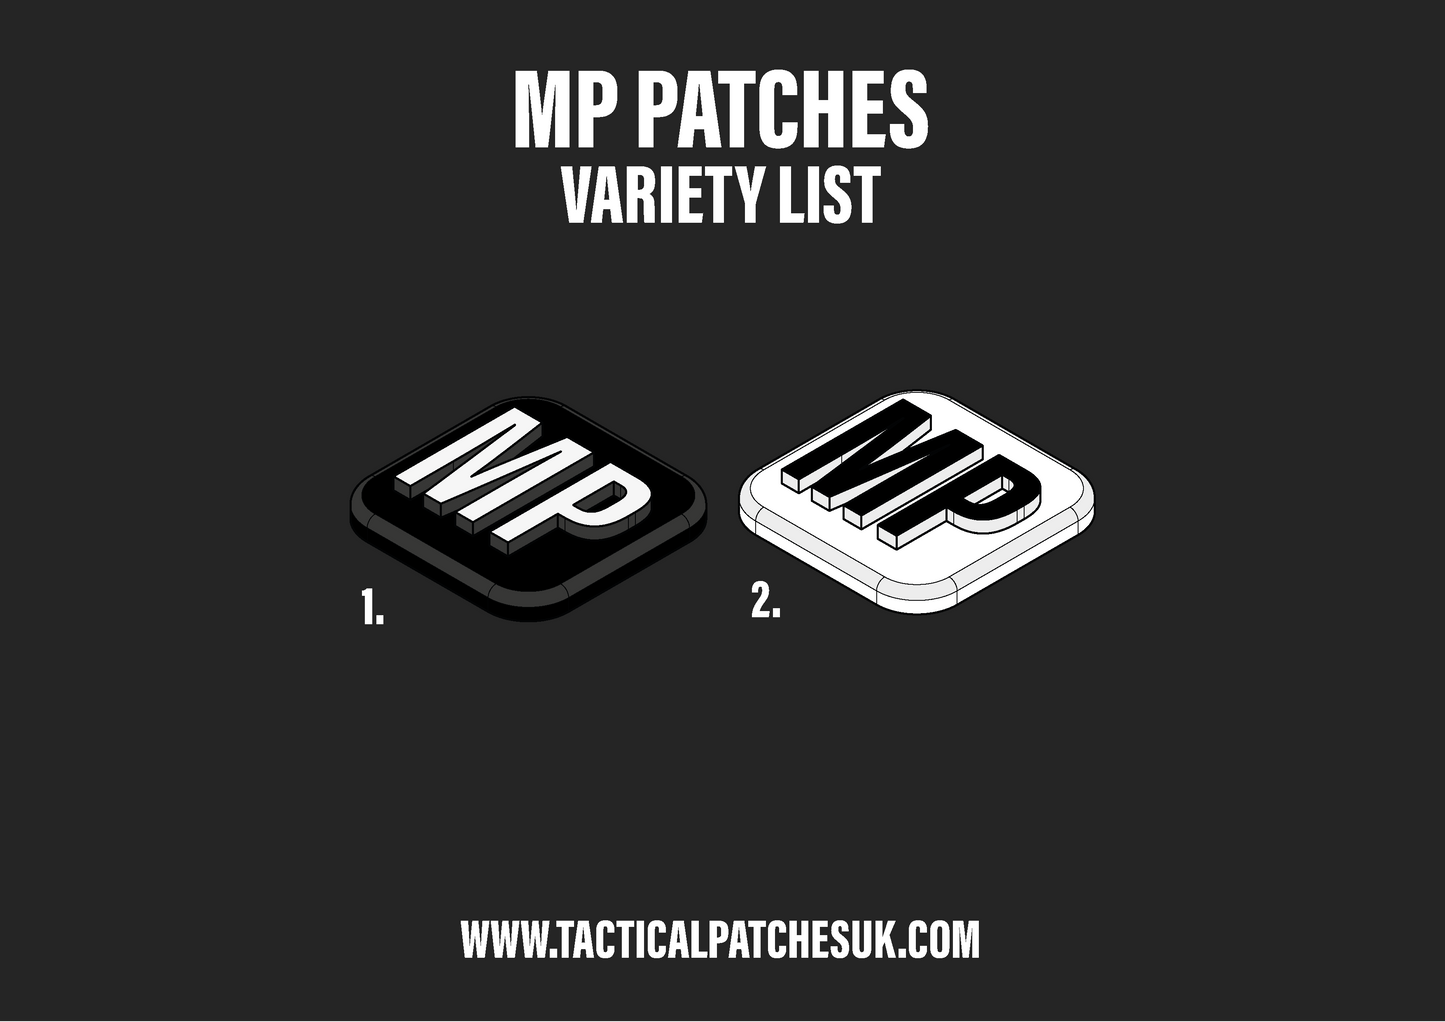 MP - Military Police Velcro Patches - 1x1